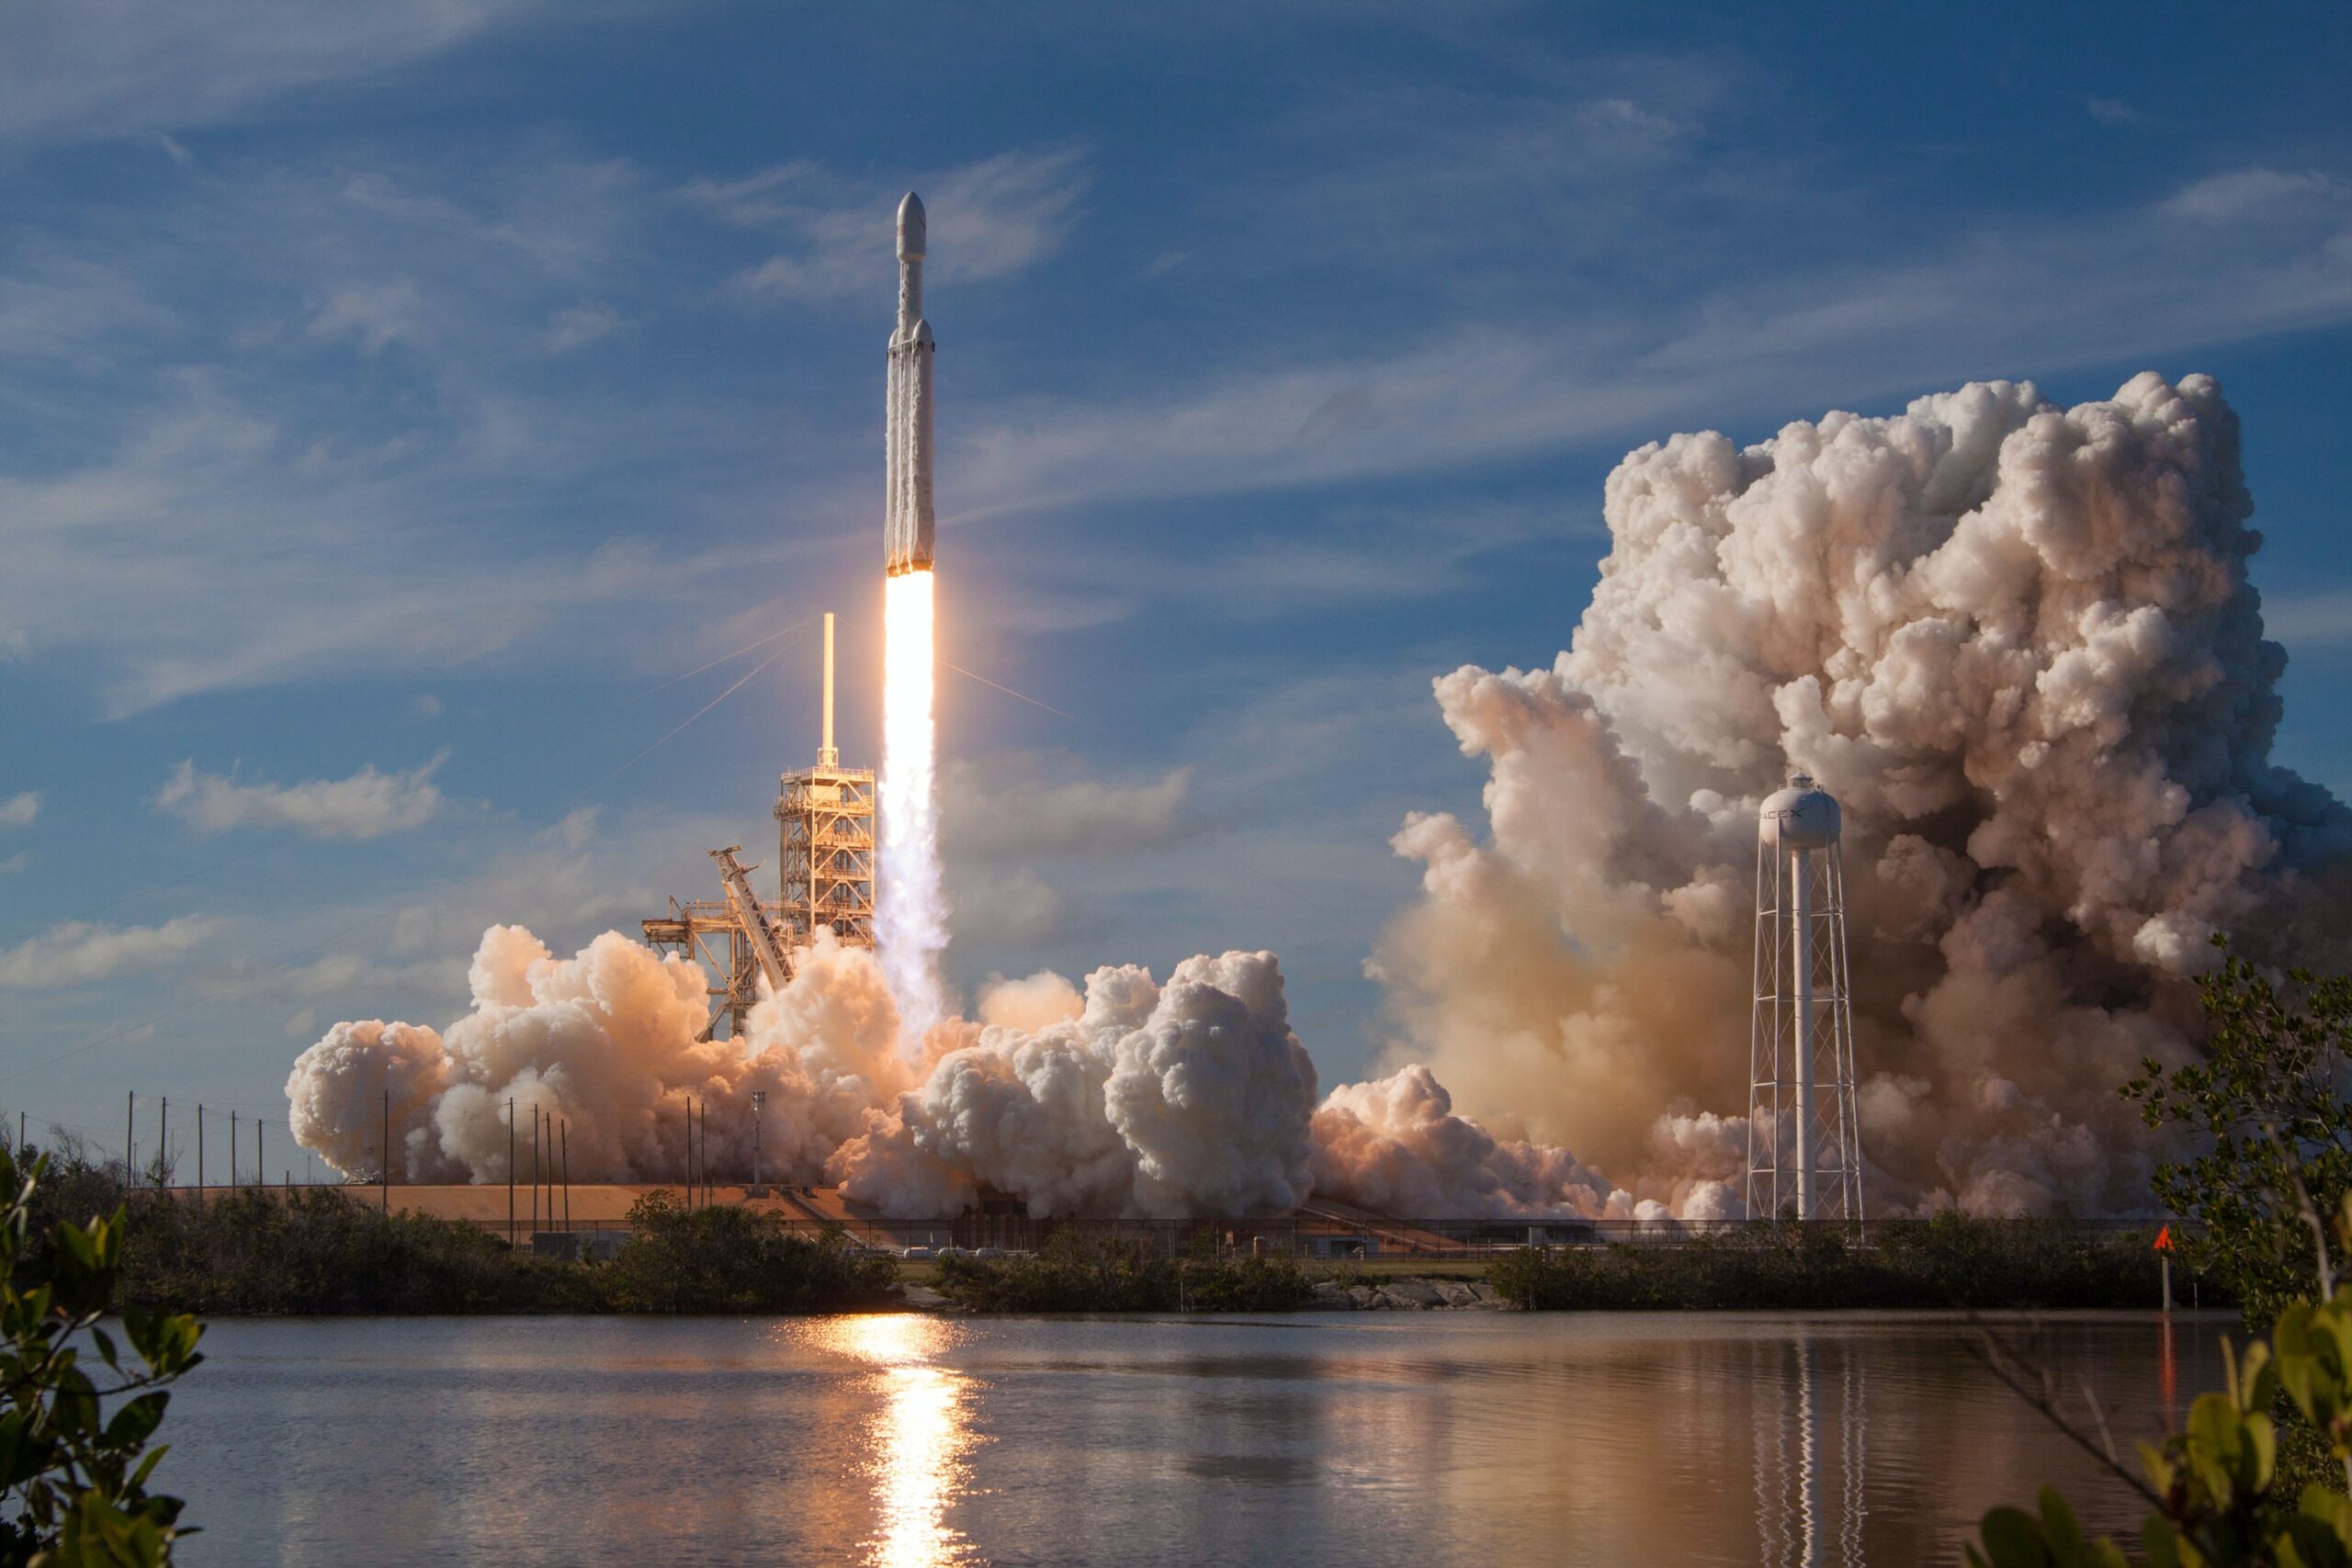 Elon Musk’s SpaceX Tests Limits of US Law – Who Can You Hire?